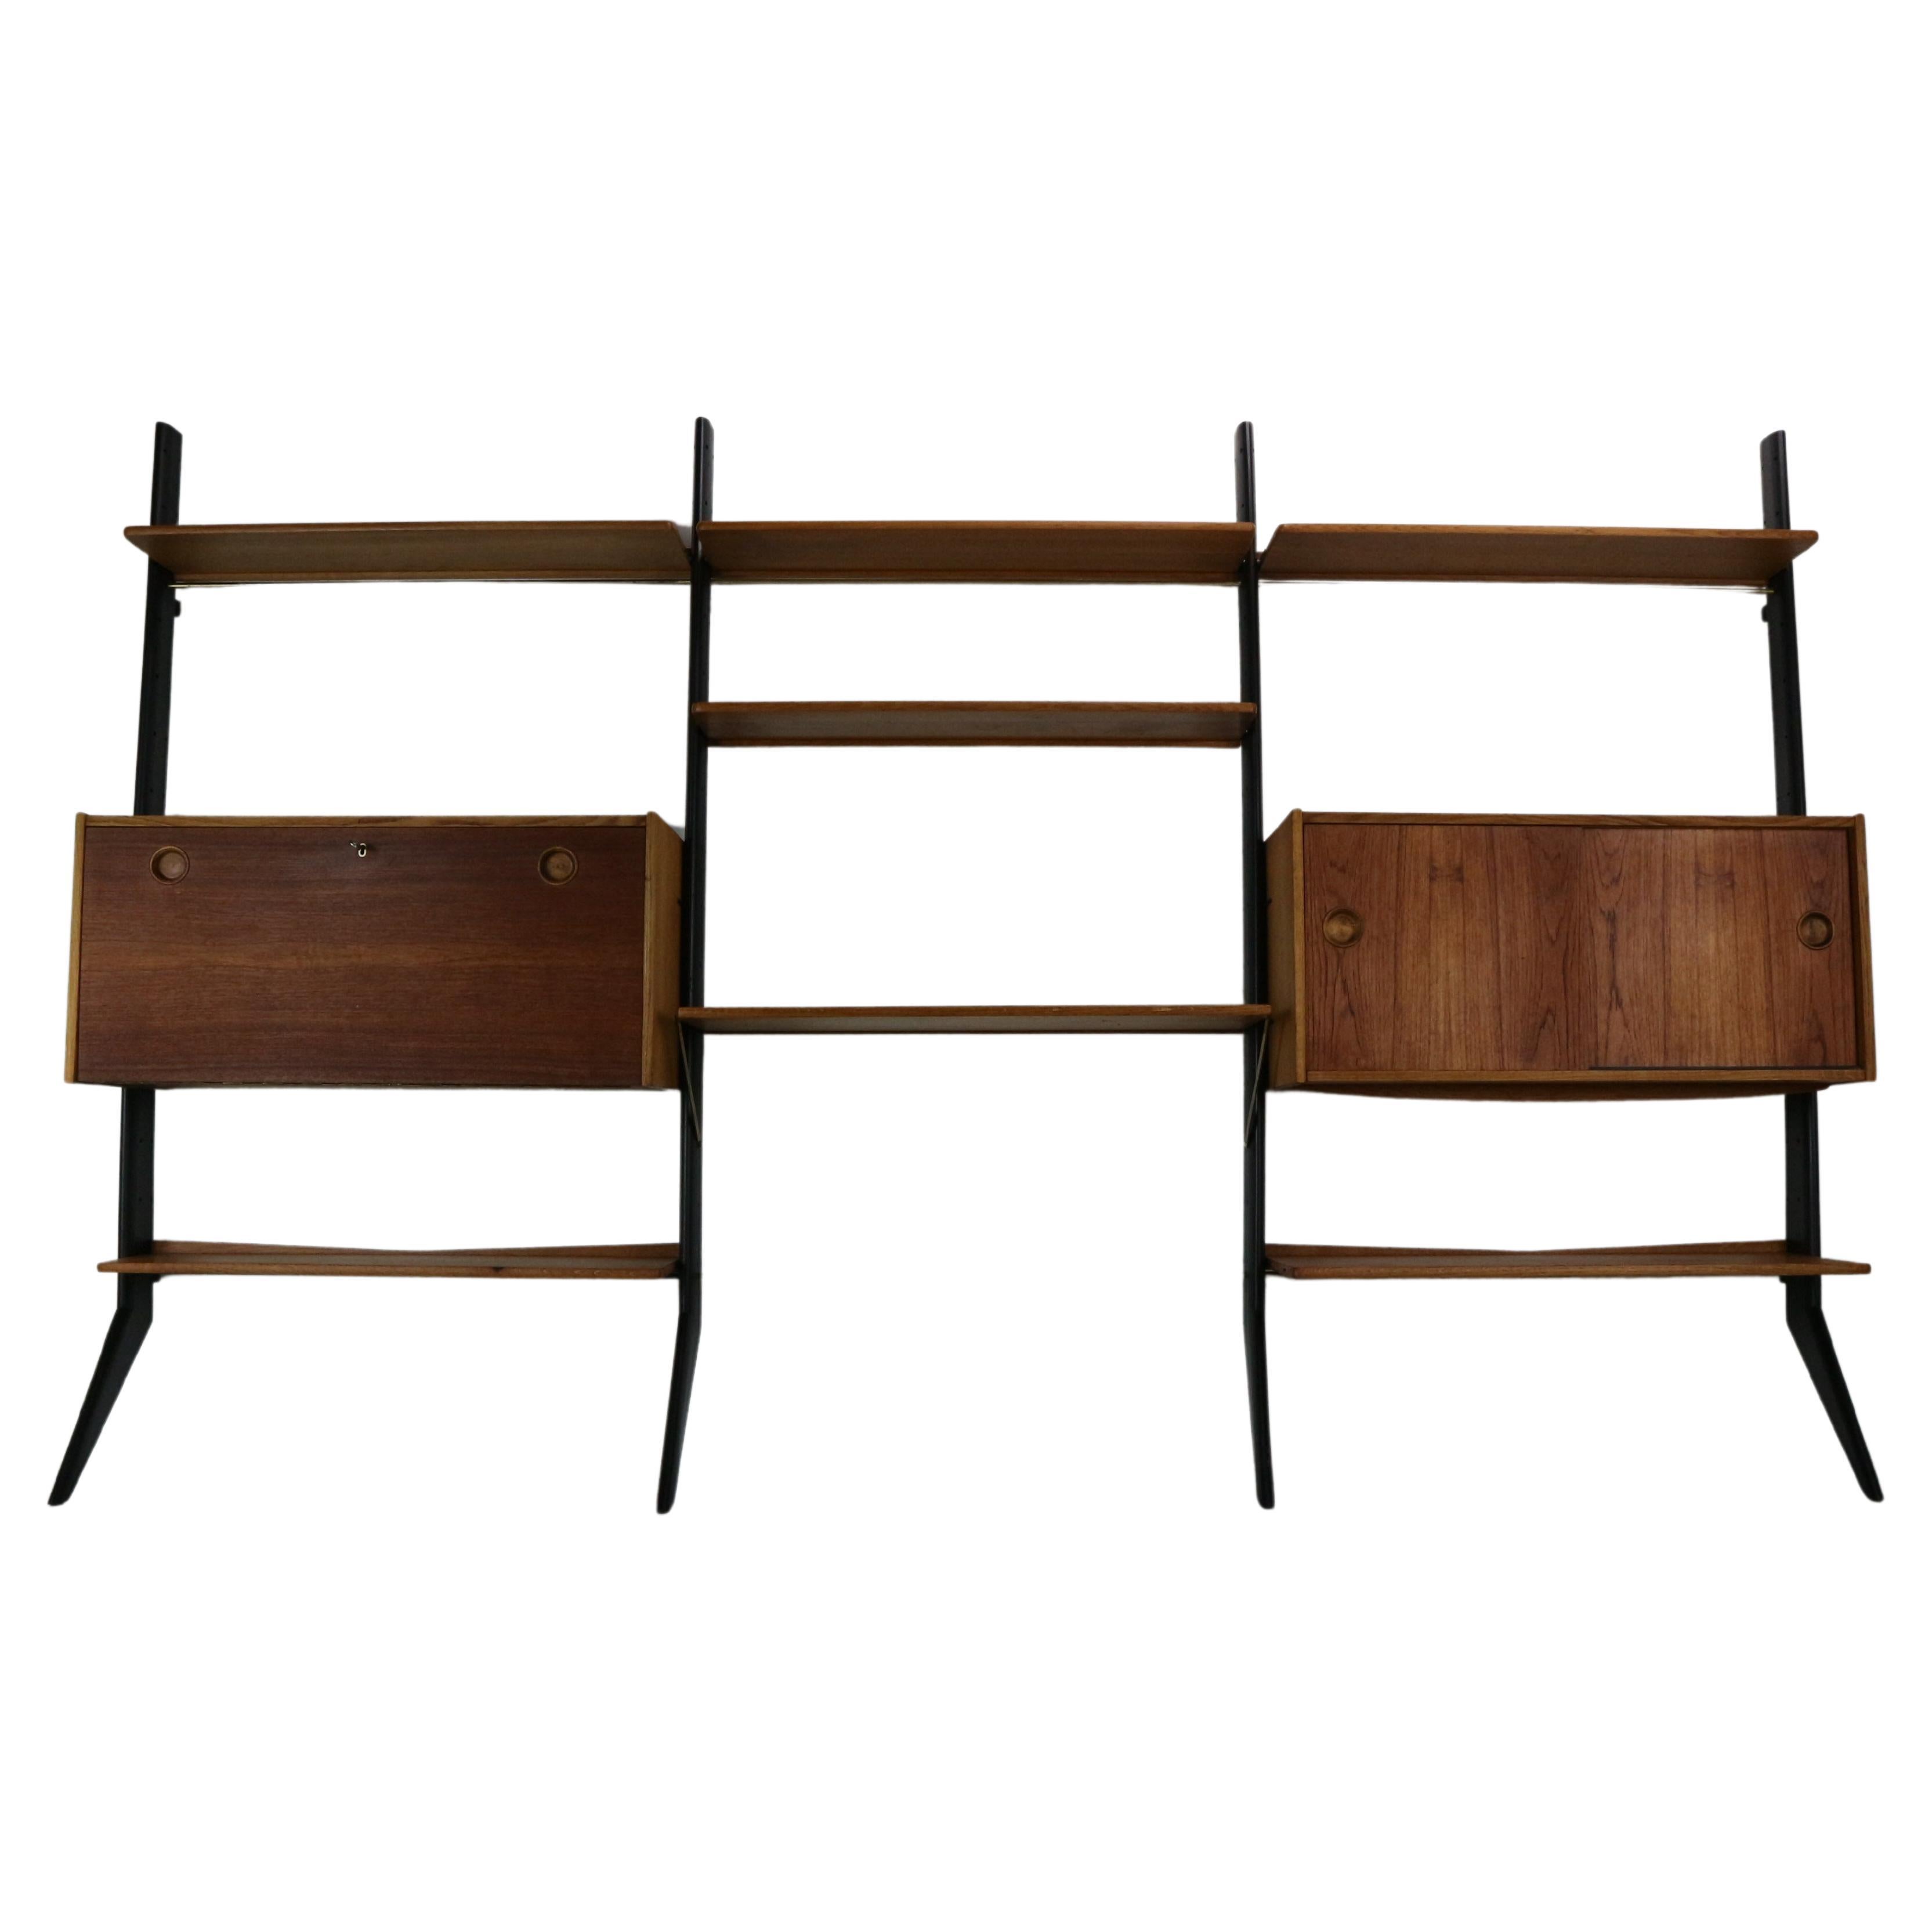 William Watting  Free Standing Modular Wall unit, 1960s the Netherlands For Sale